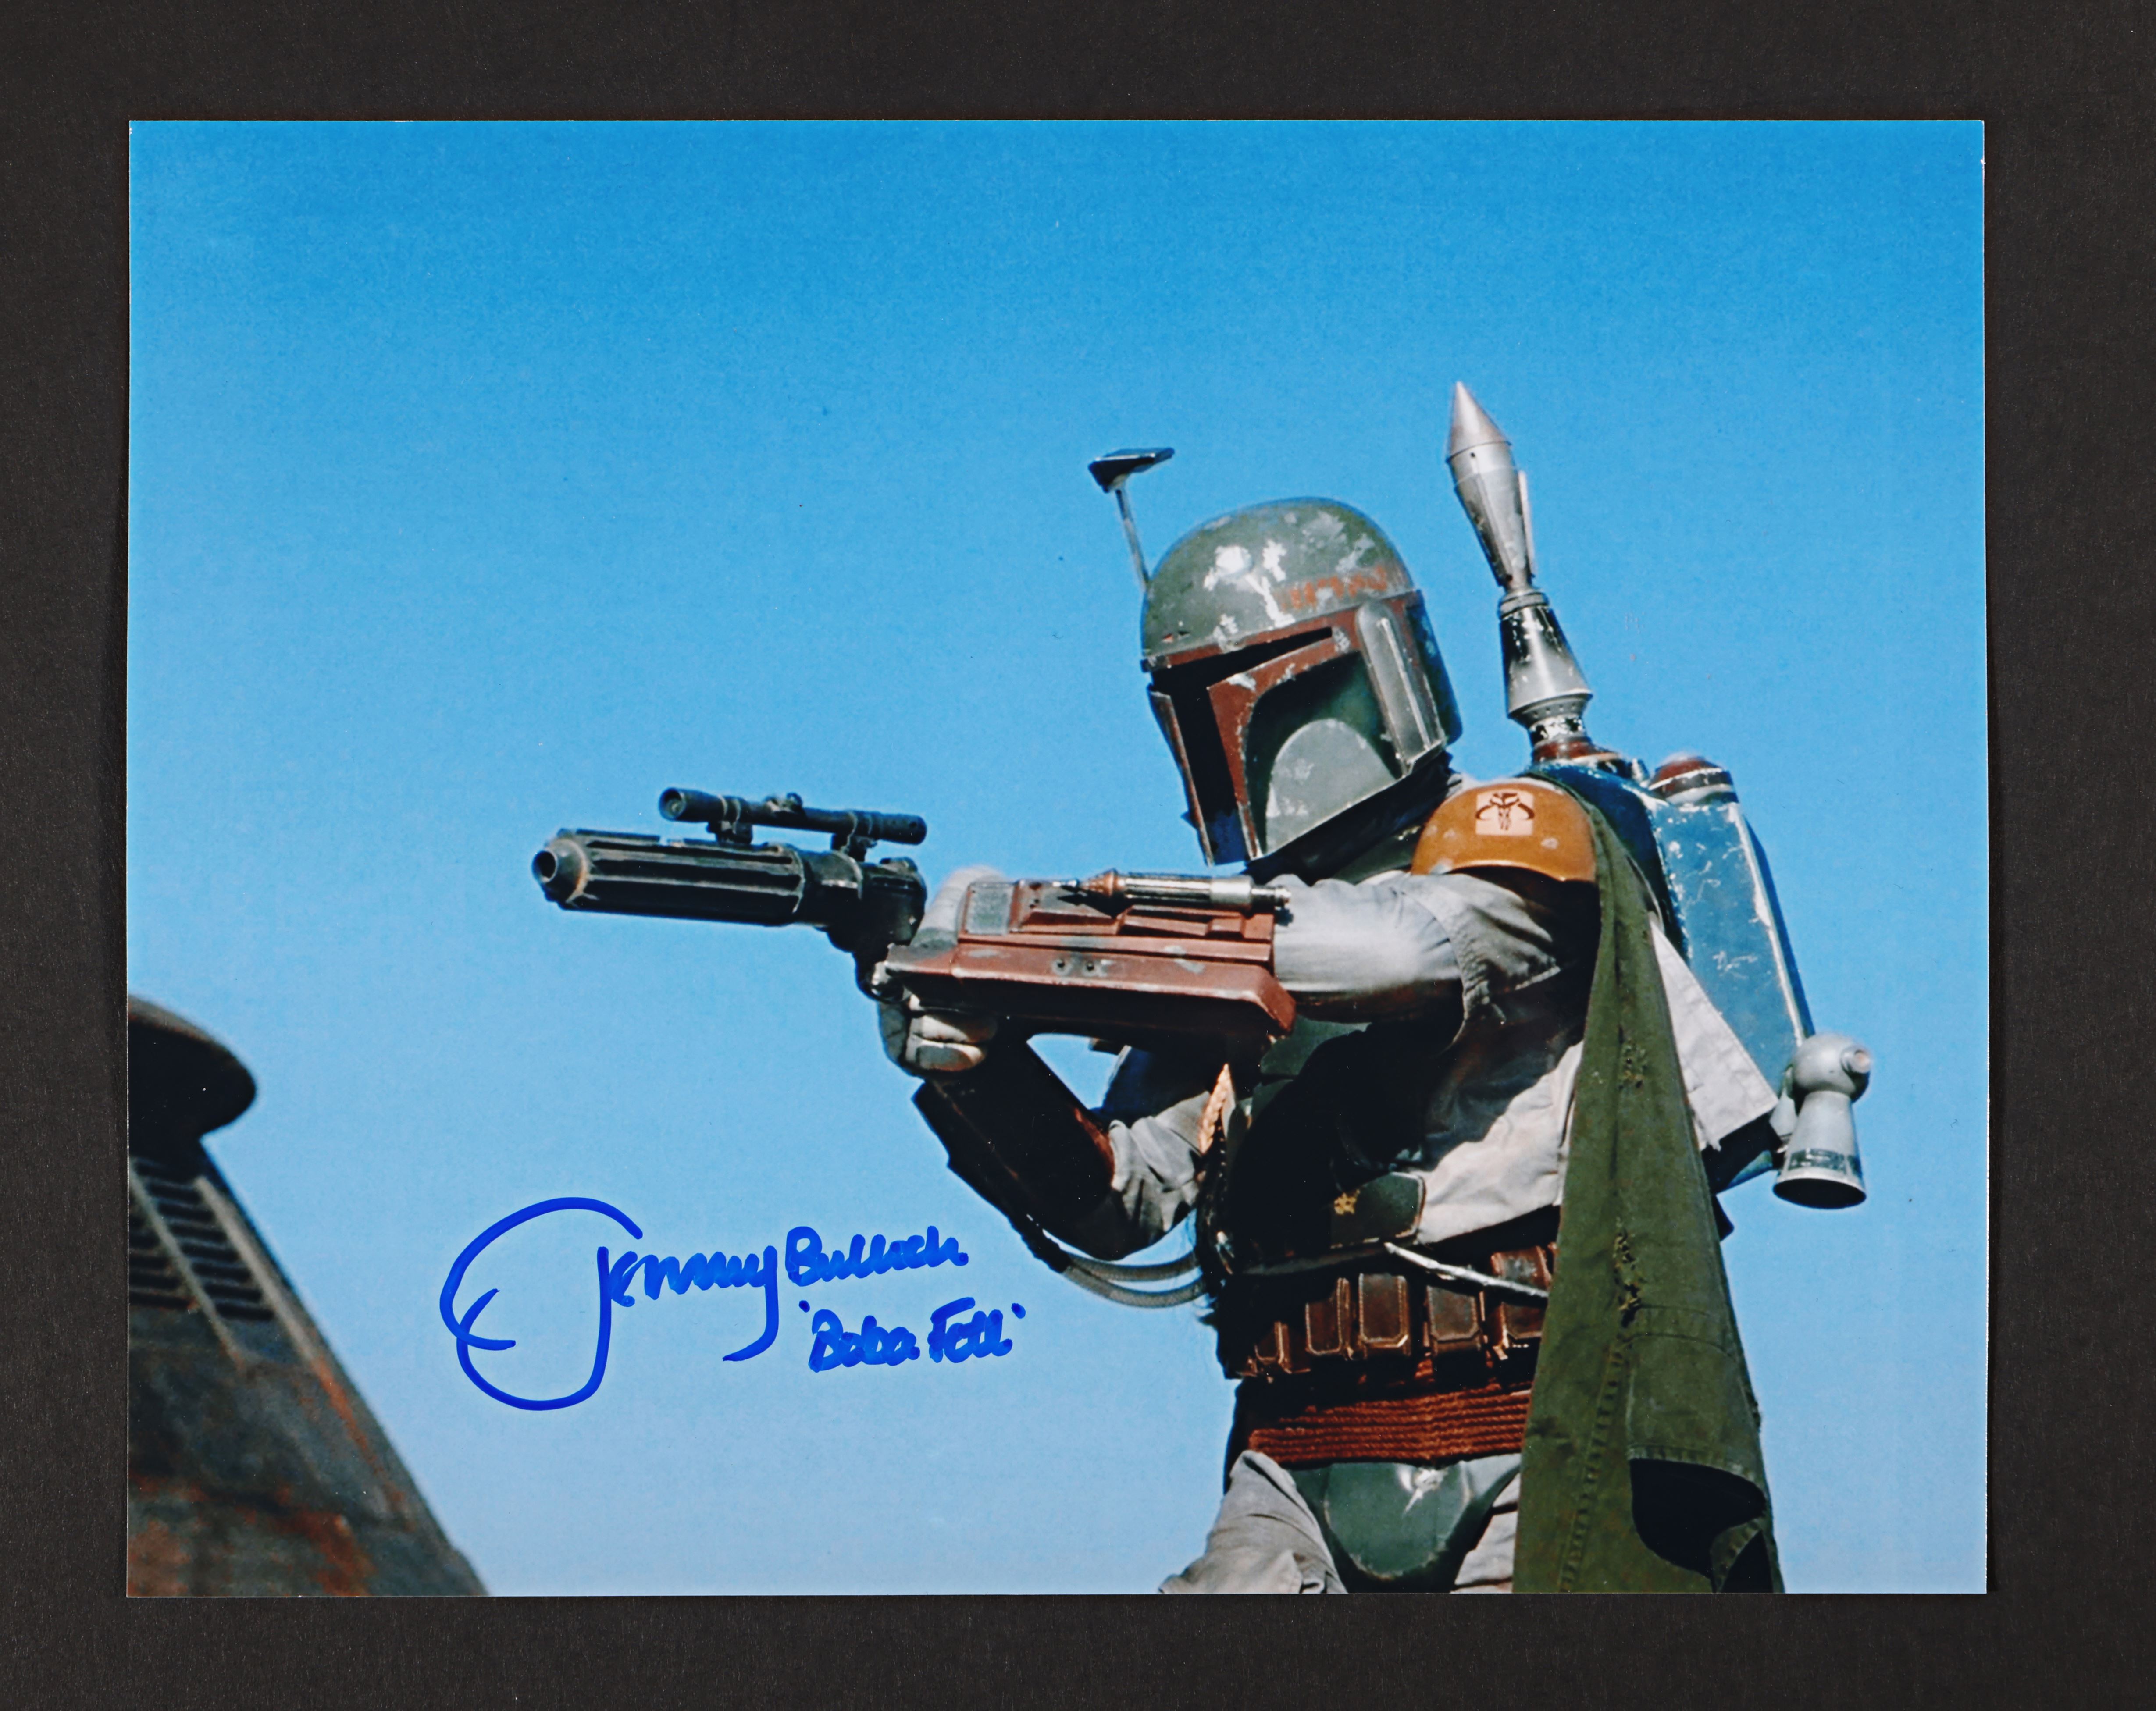 STAR WARS ORIGINAL TRILOGY (1977-83) - Dave Prowse and Jeremy Bulloch Autographed Photographs - Image 2 of 3